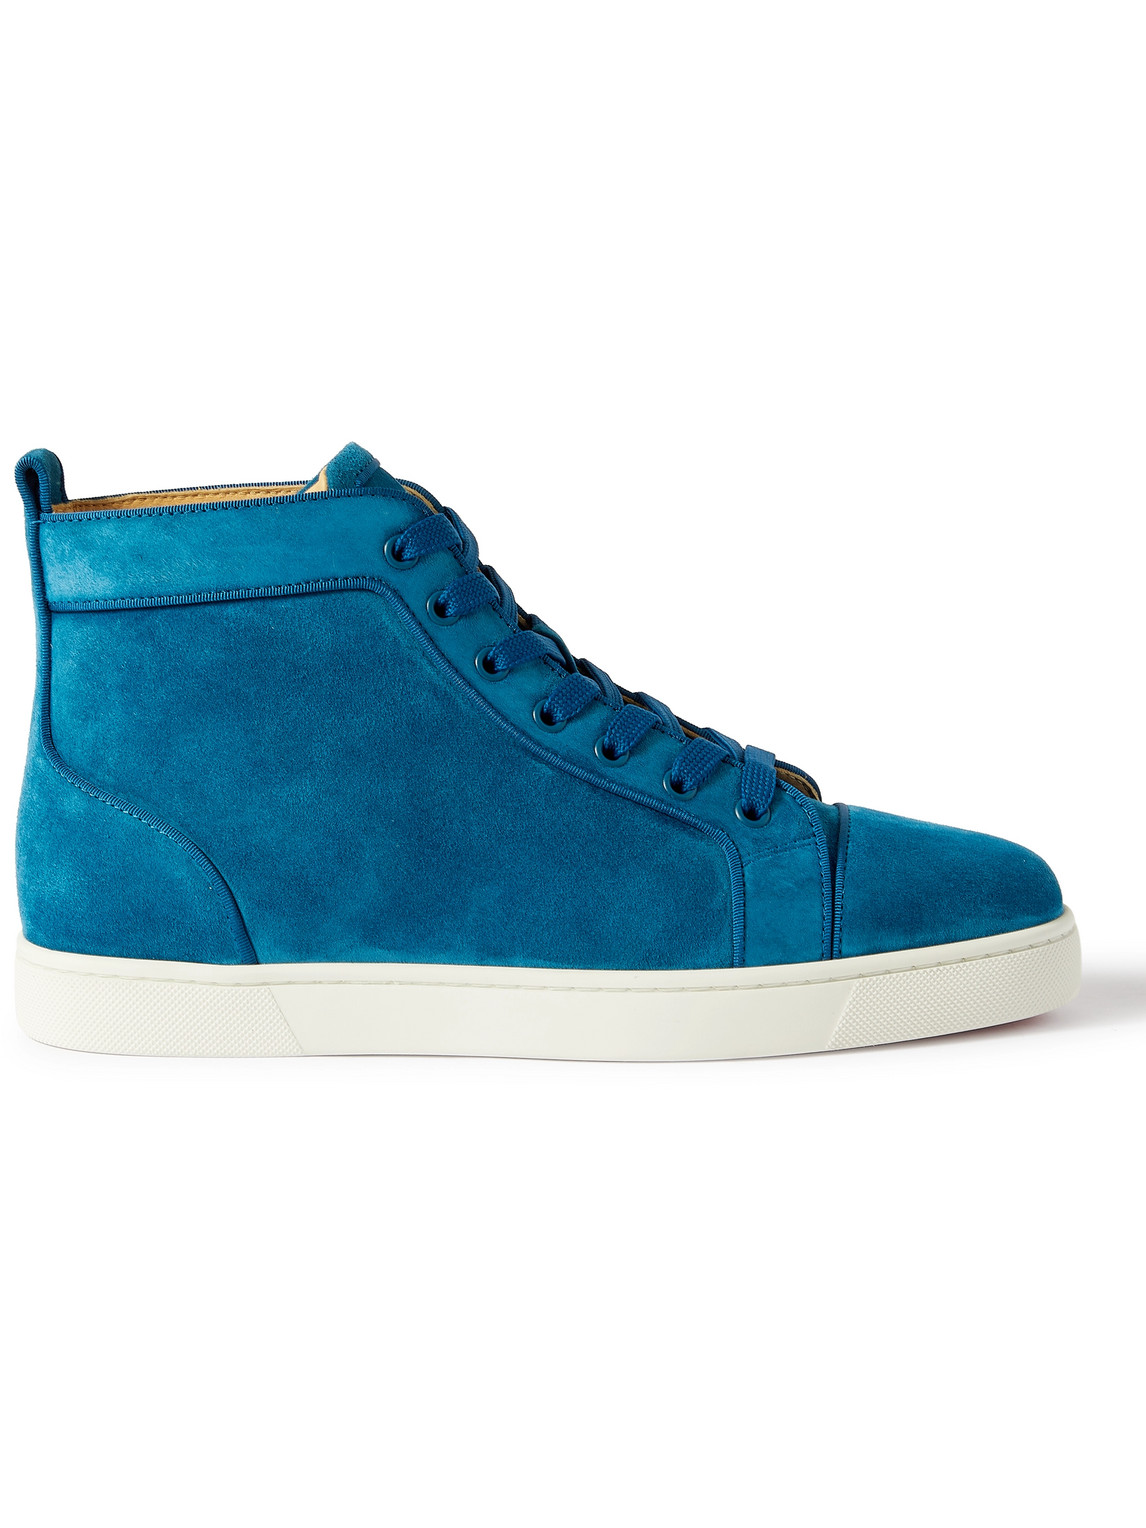 CHRISTIAN LOUBOUTIN LOUIS ORLATO GROSGRAIN-TRIMMED SUEDE HIGH-TOP SNEAKERS